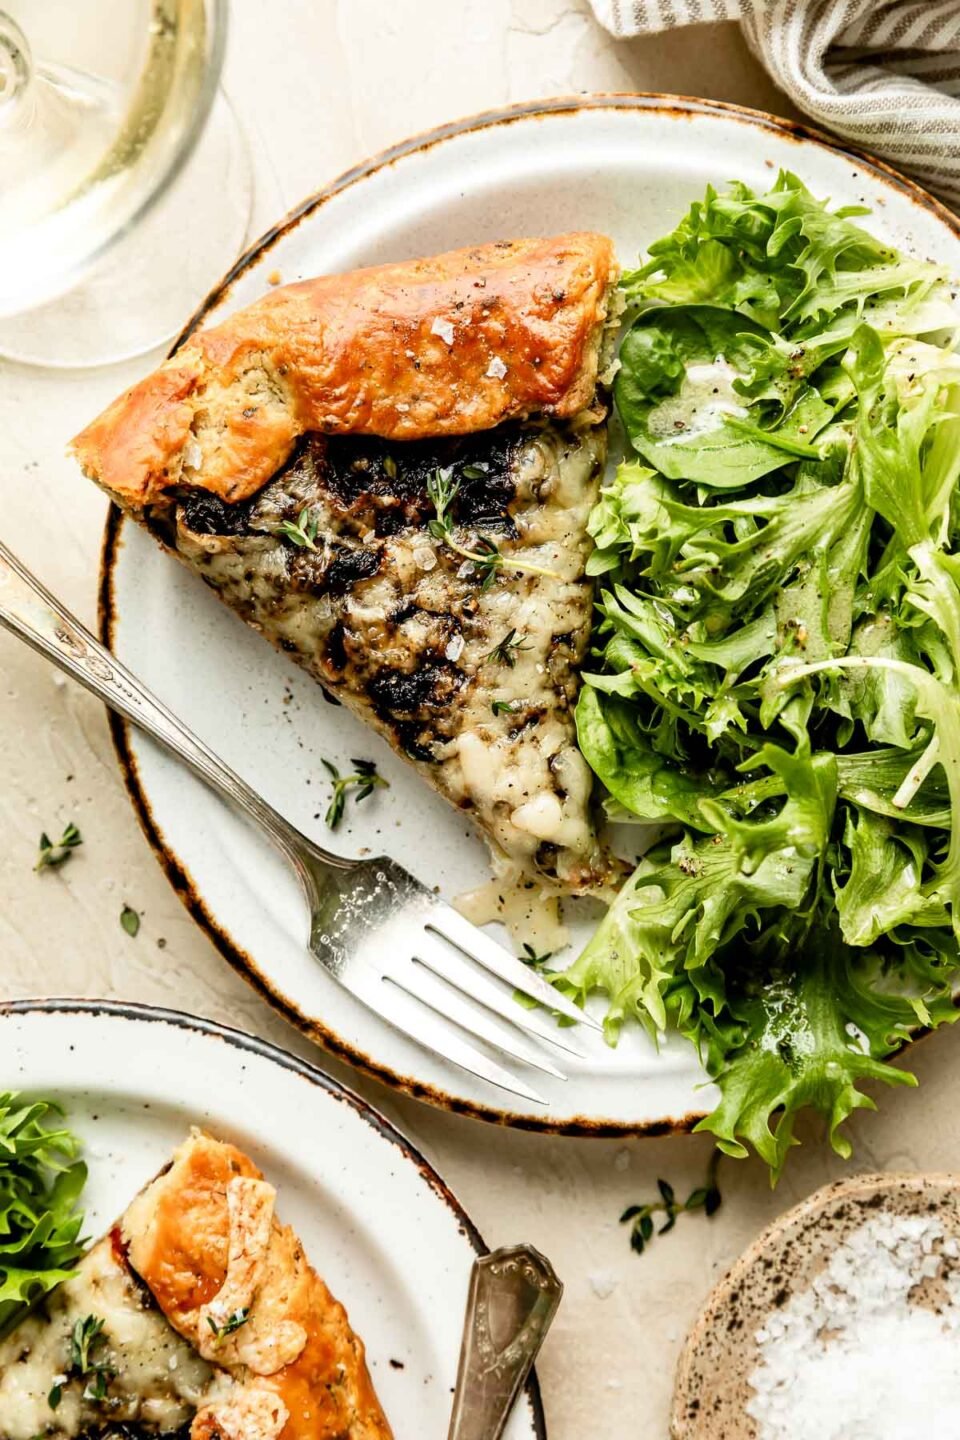 An overhead shot of a slice of a cheesy caramelized onion galette alongside mixed greens on a white plate atop an off-white surface. A glass of white wine sits alongside the plate.